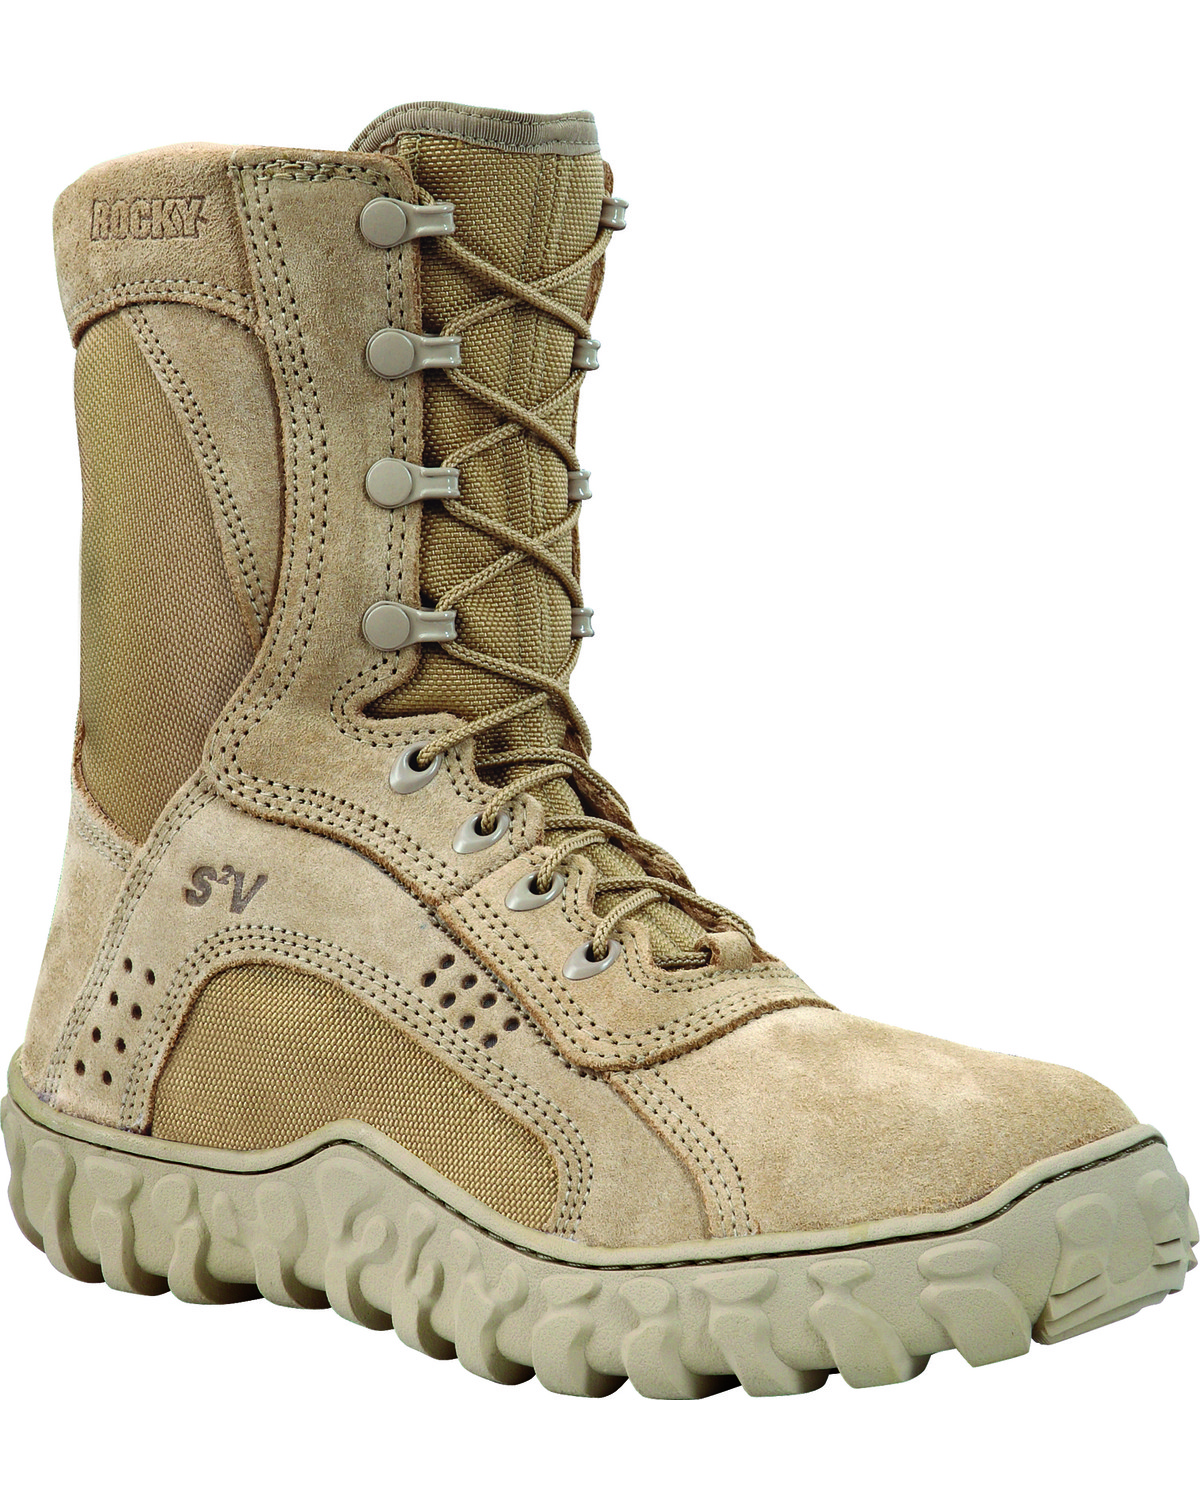 military steel toe work boots